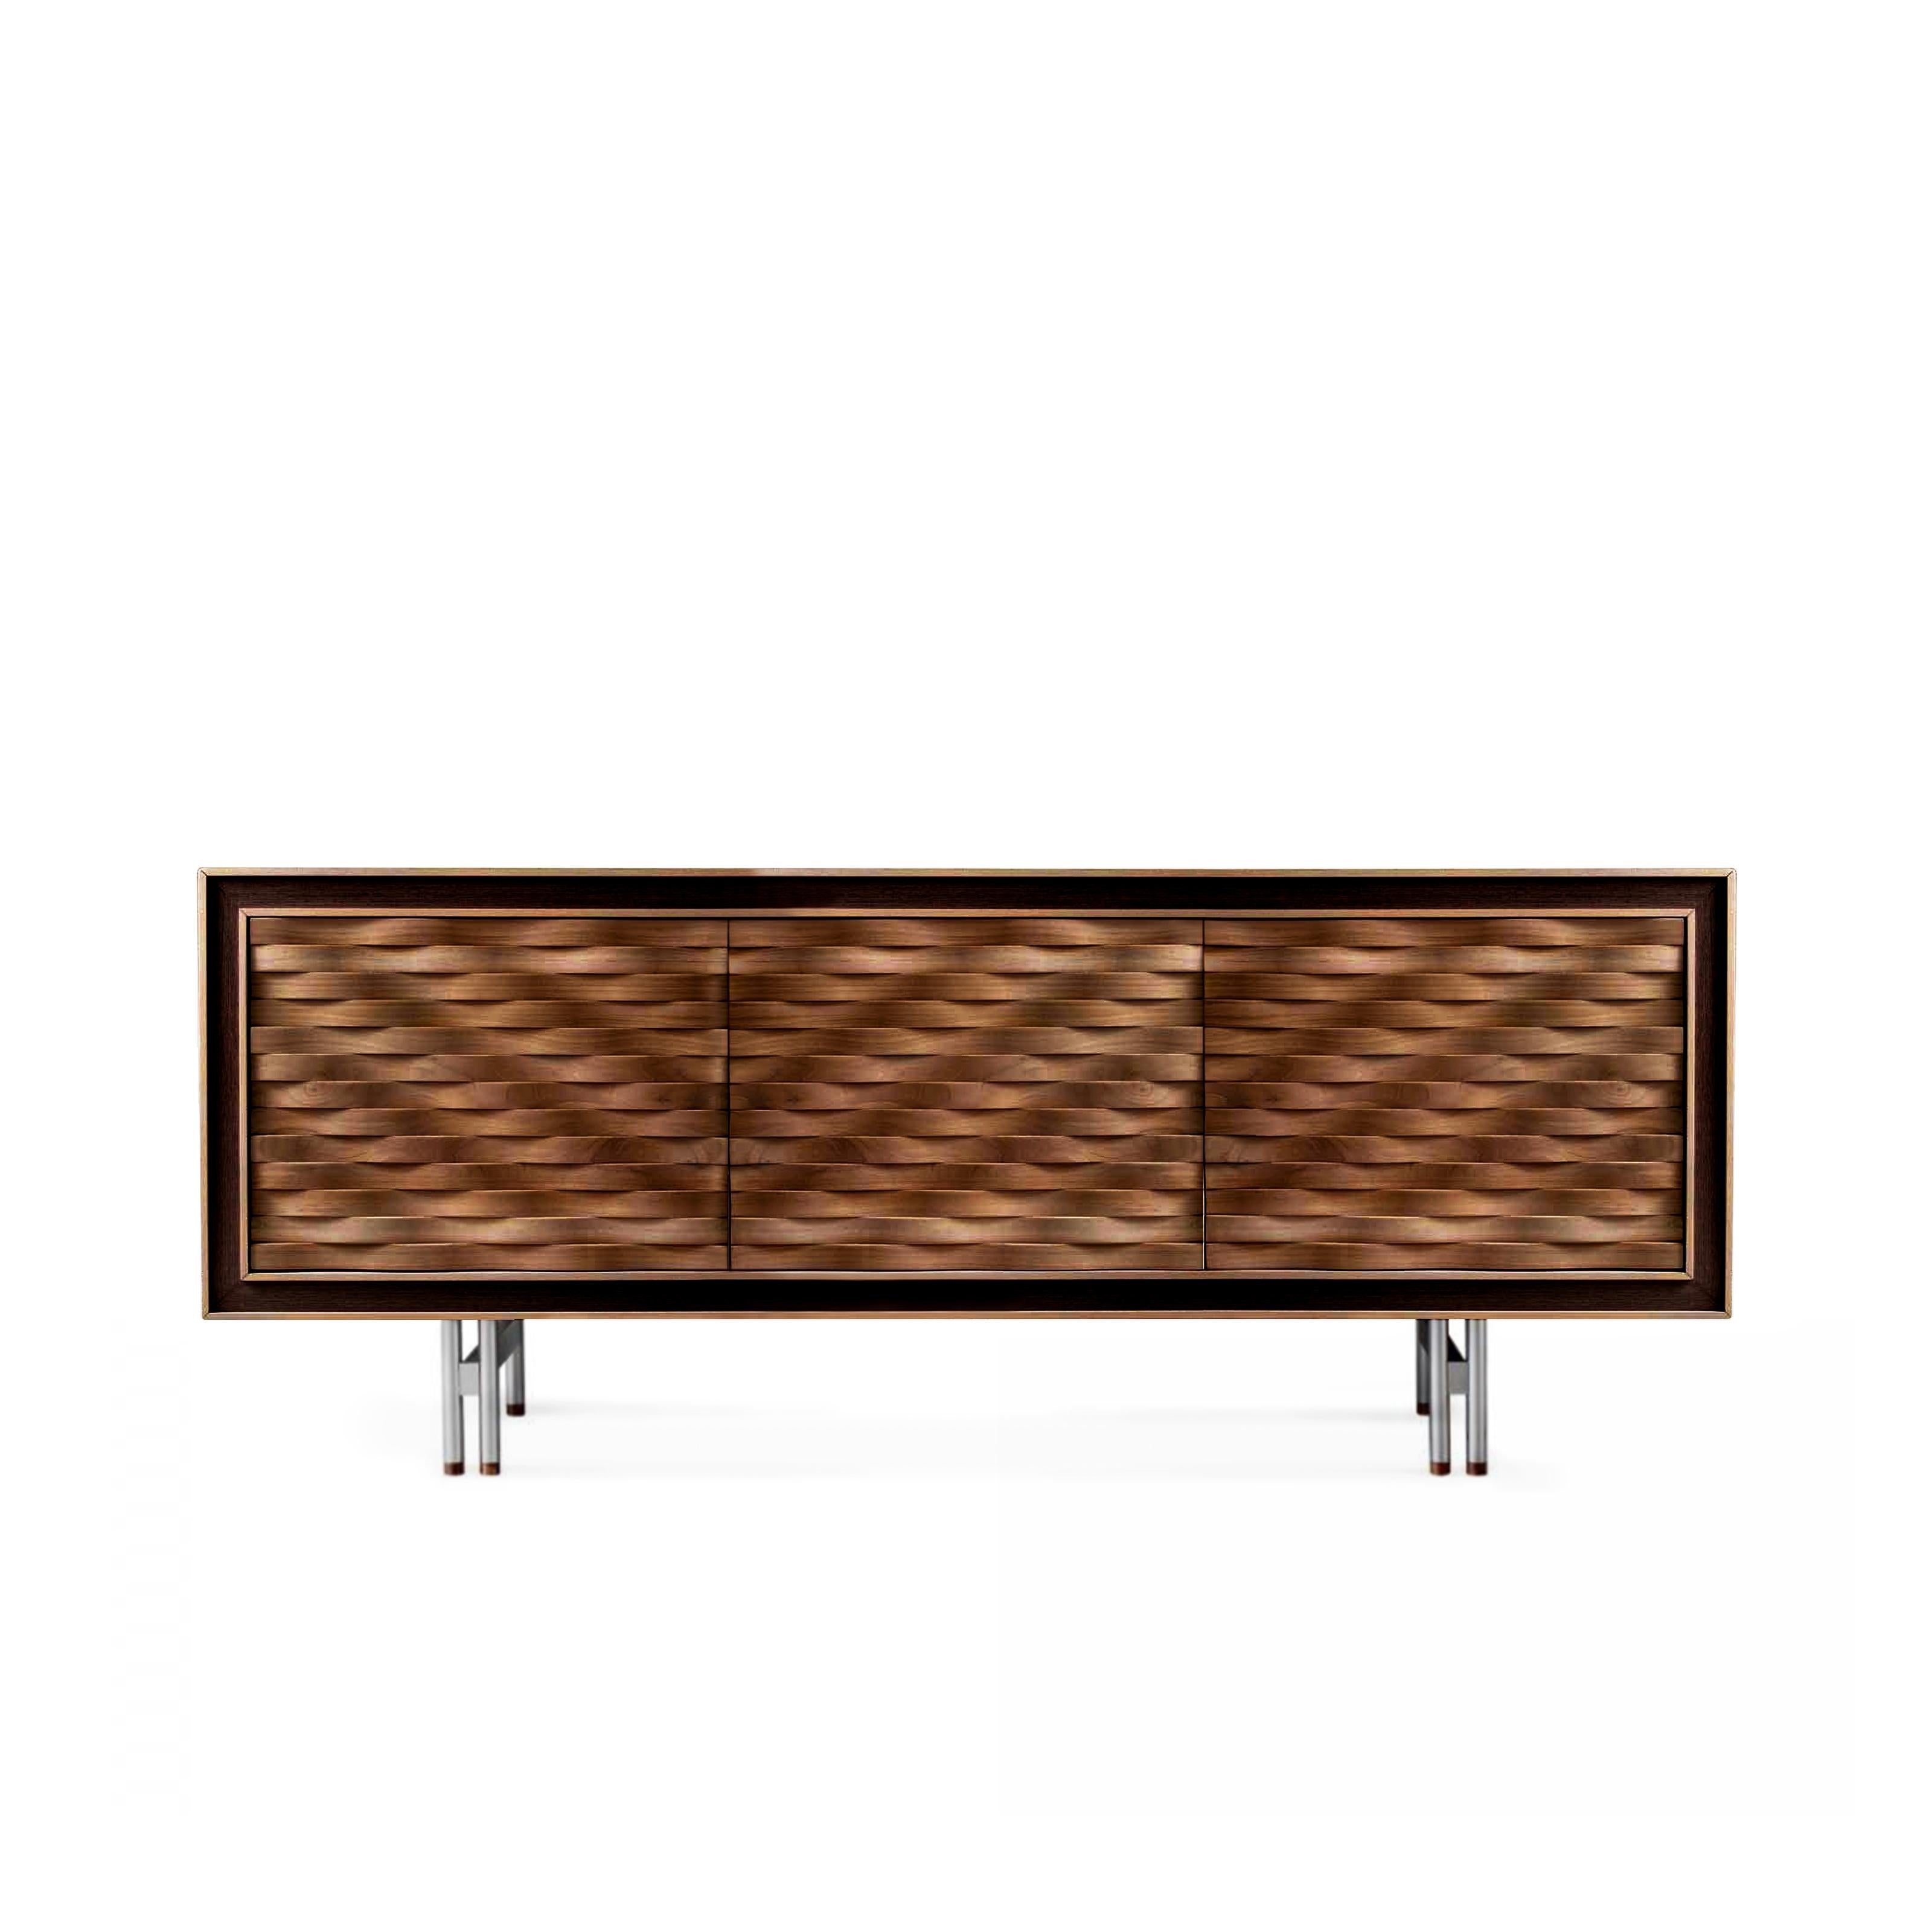 A stunning sideboard that combines Fine Italian design with exceptional craftsmanship. Made of premium solid walnut in natural oil finish, it’s a timeless piece perfect for elegant and contemporary interior design. It comes with 3 doors and internal